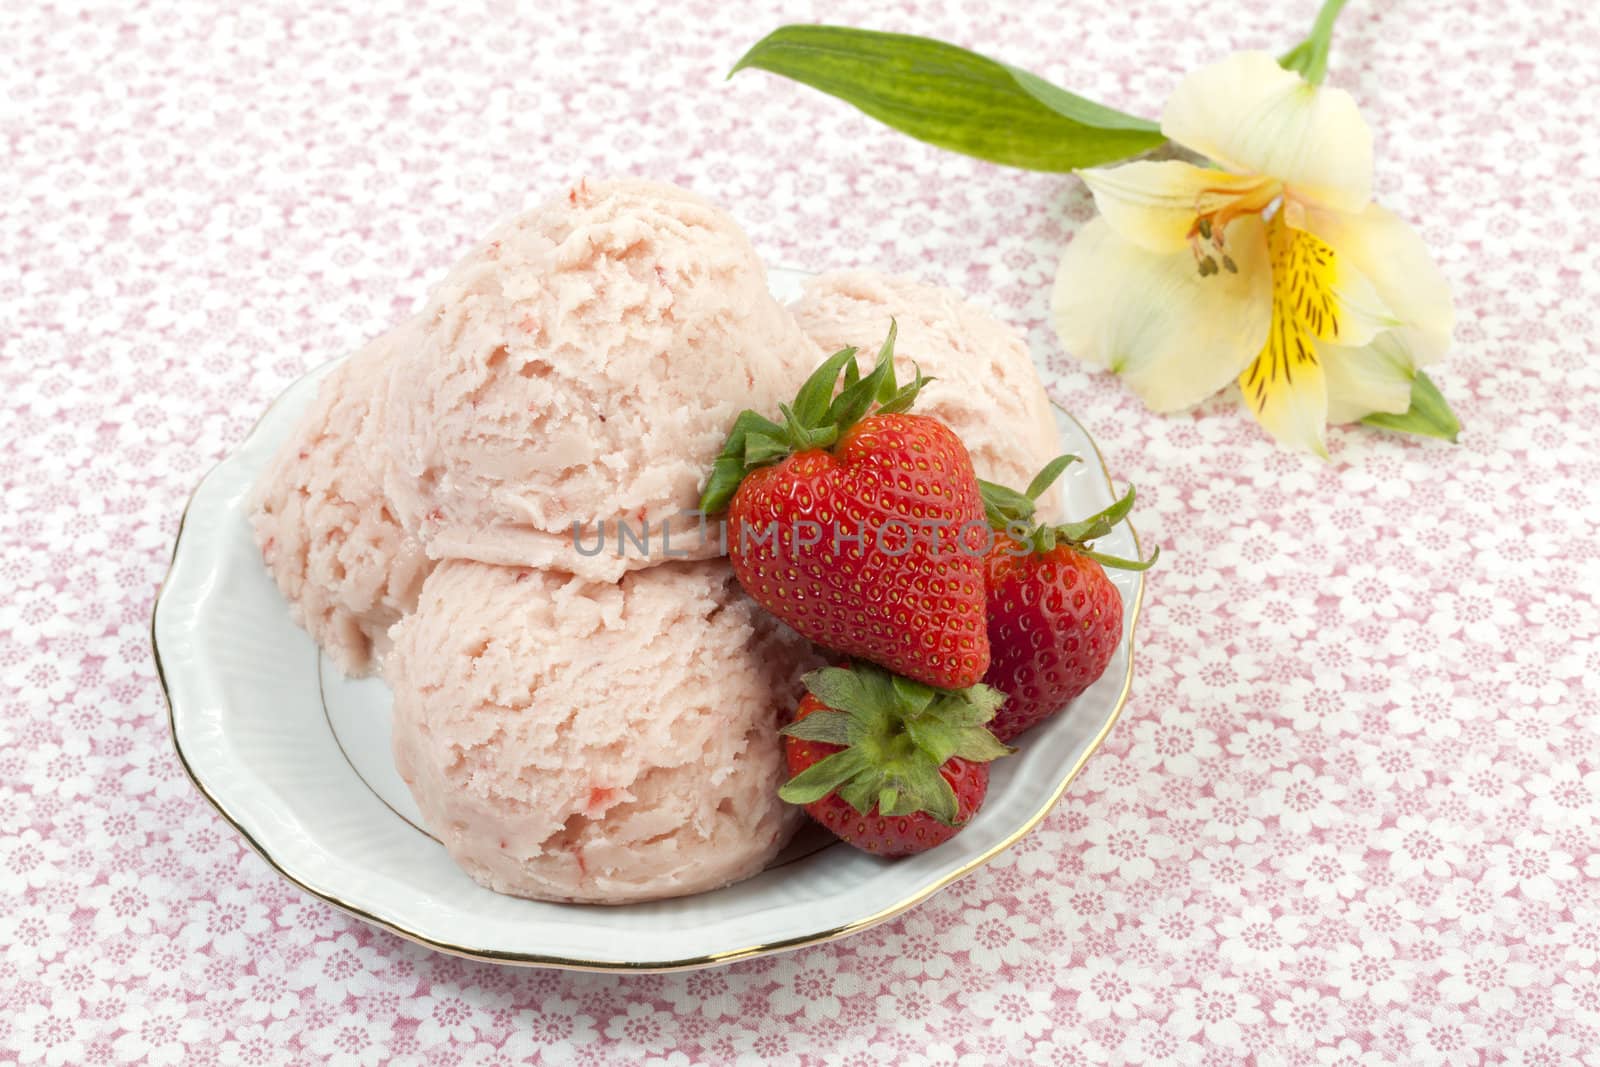 strawberry ice cream with flowers at the side by kozzi